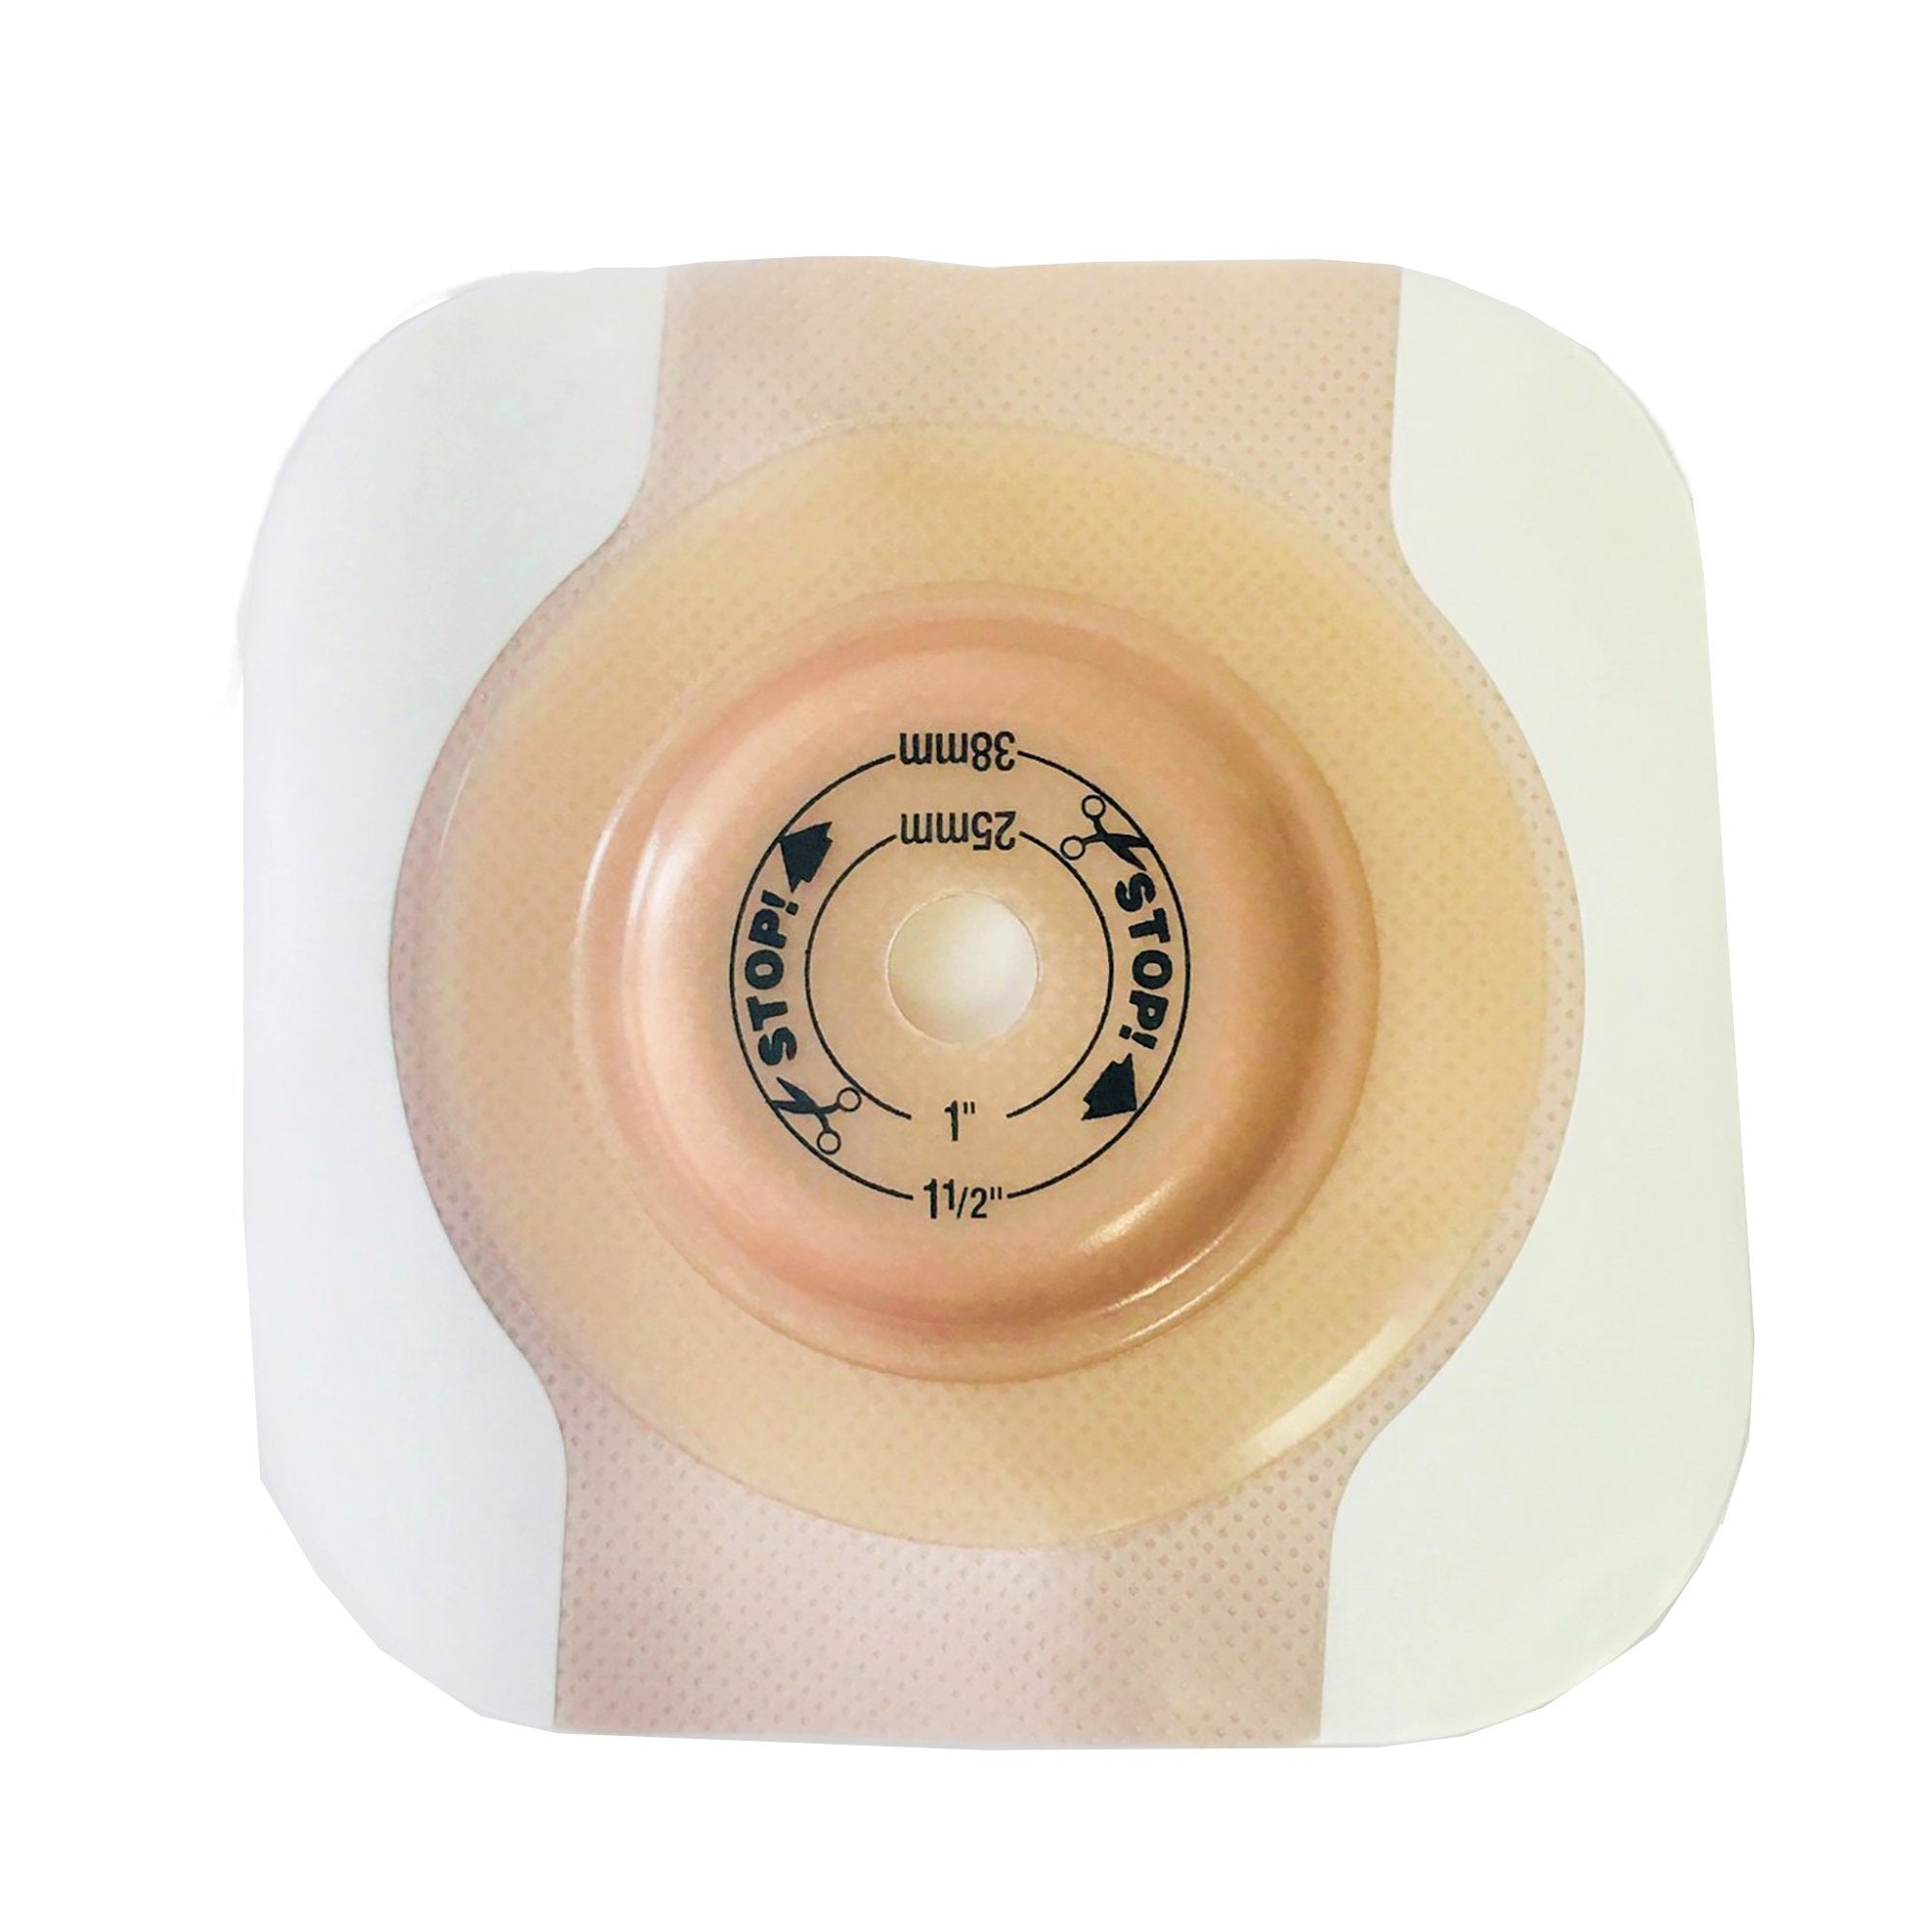 Ostomy Barrier New Image CeraPlus Trim to Fit, Extended Wear Adhesive Tape Borders 44 mm Flange Green Code System Up to 1 Inch Opening